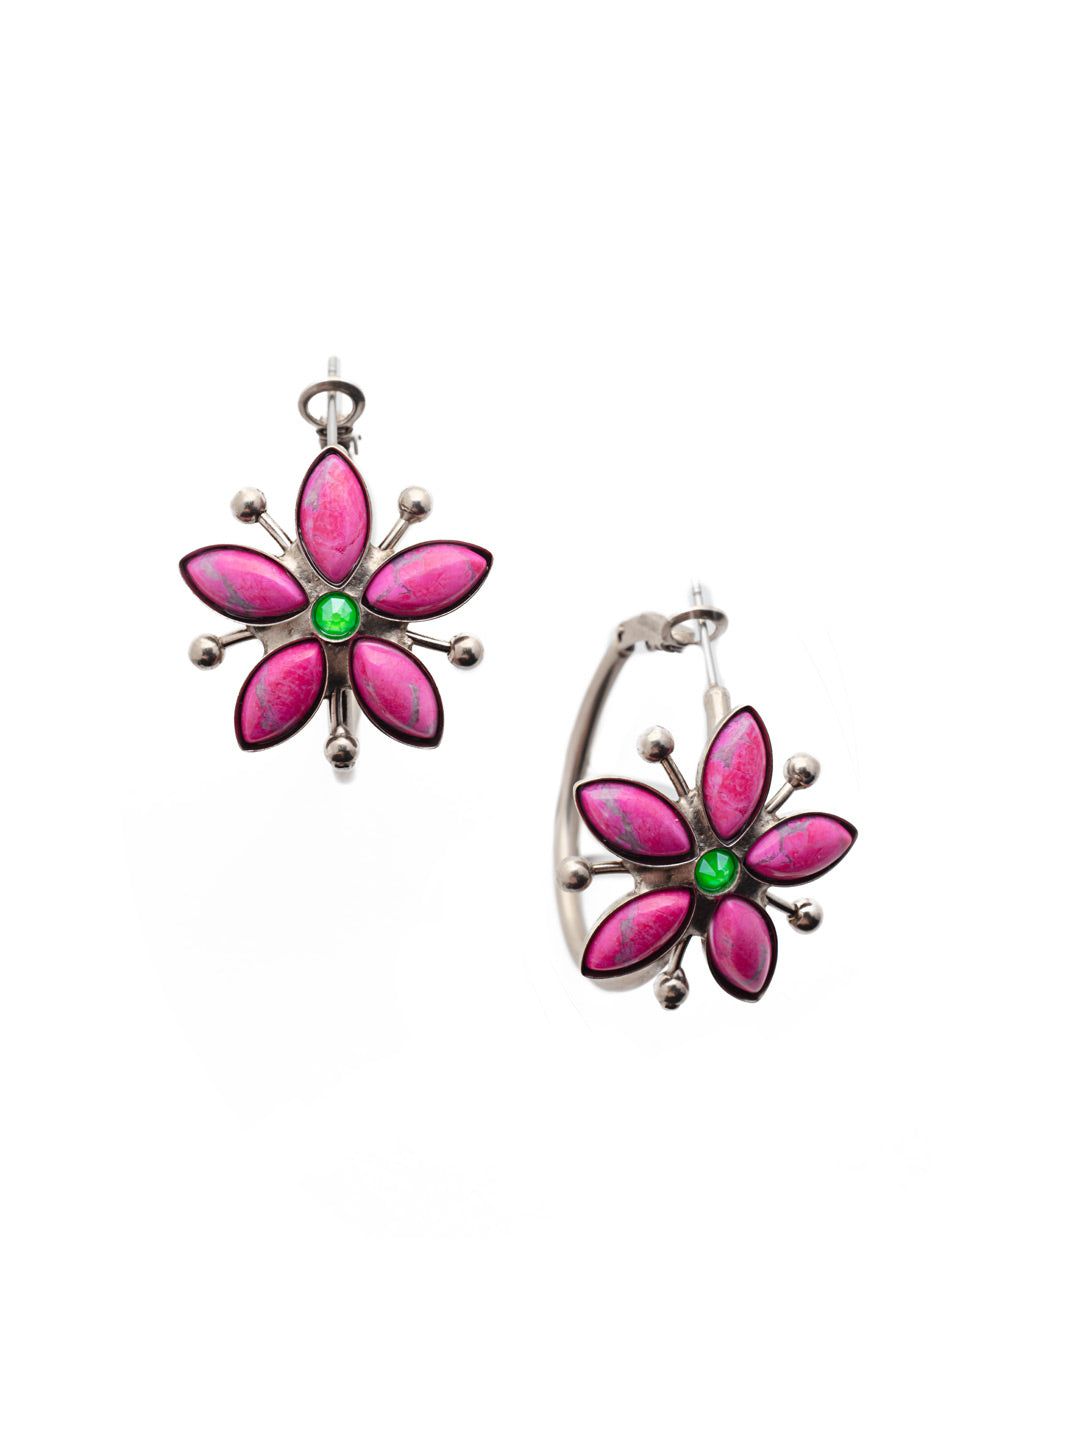 Lauren Hoop Earrings - EEV3ASWDW - <p>Petals and metal: that's the Lauren Hoop Earring. They're crafted with opague navette crystals to form a fabulous floral statement. From Sorrelli's Wild Watermelon collection in our Antique Silver-tone finish.</p>